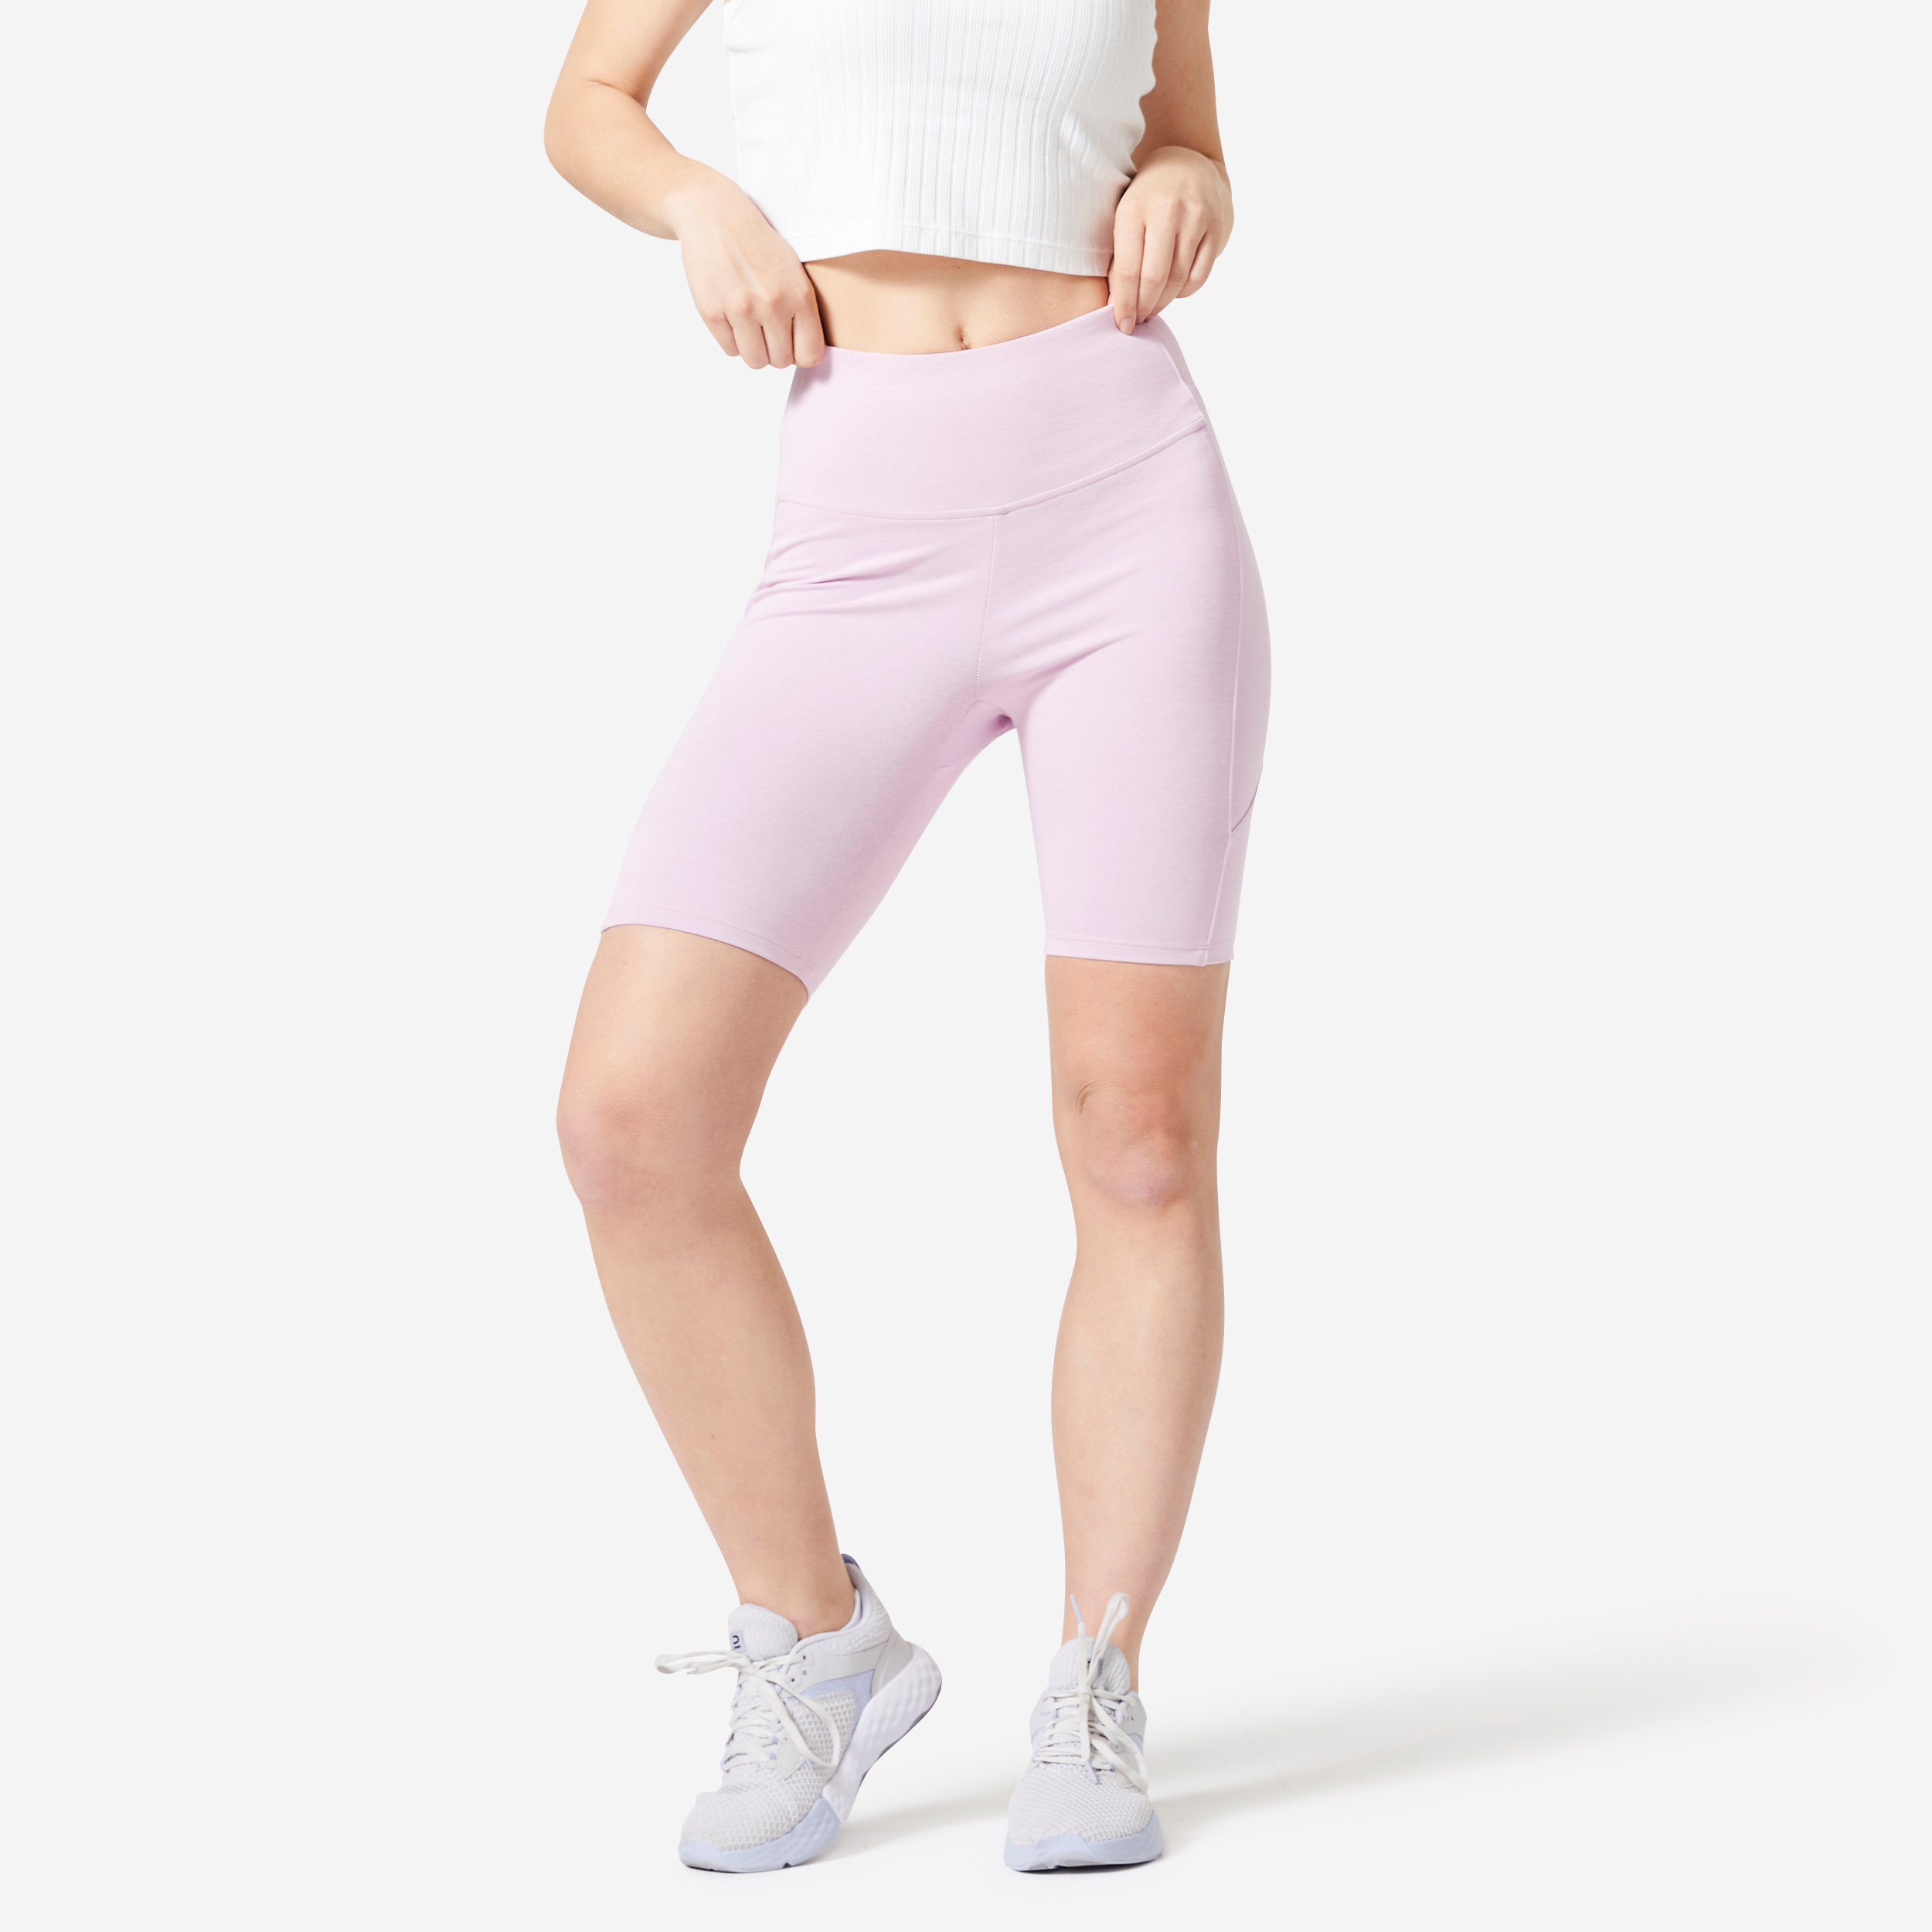 Short Cycliste Fitness Femme Galbant- 520 rose clair